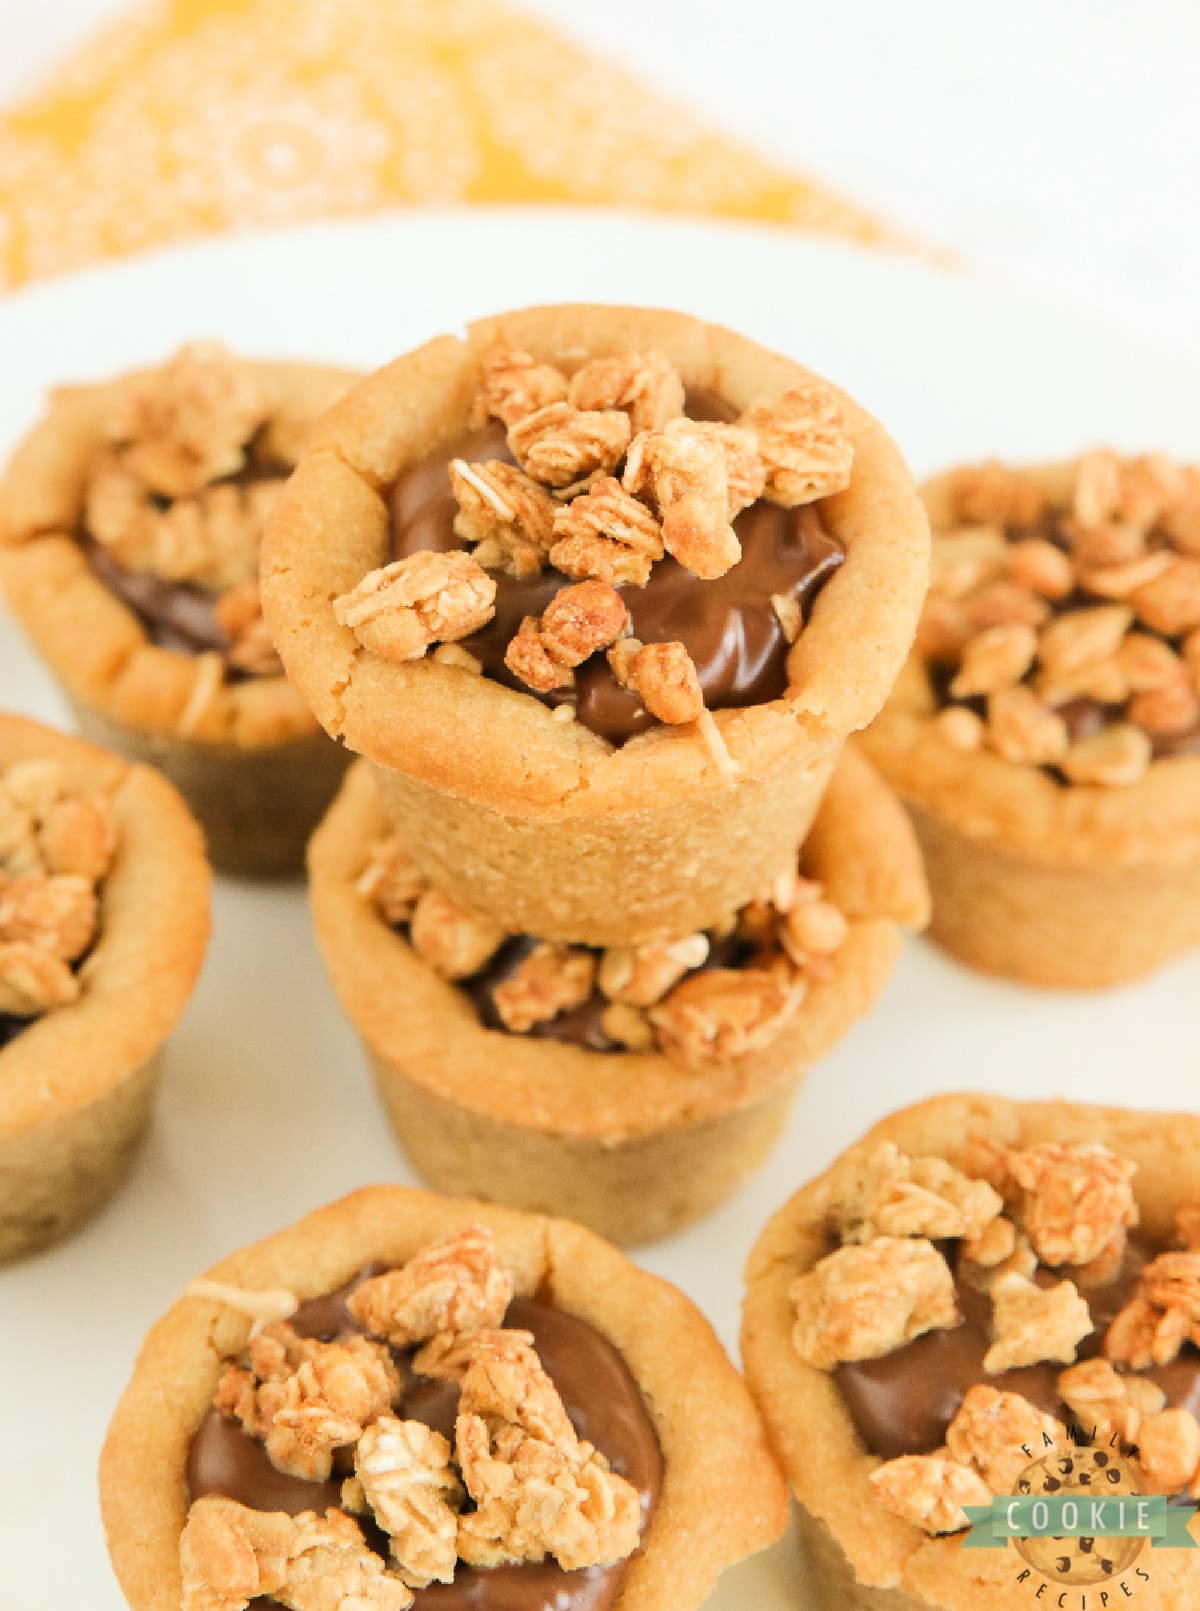 Peanut Butter Cookie Cups filled with peanut butter, chocolate and granola